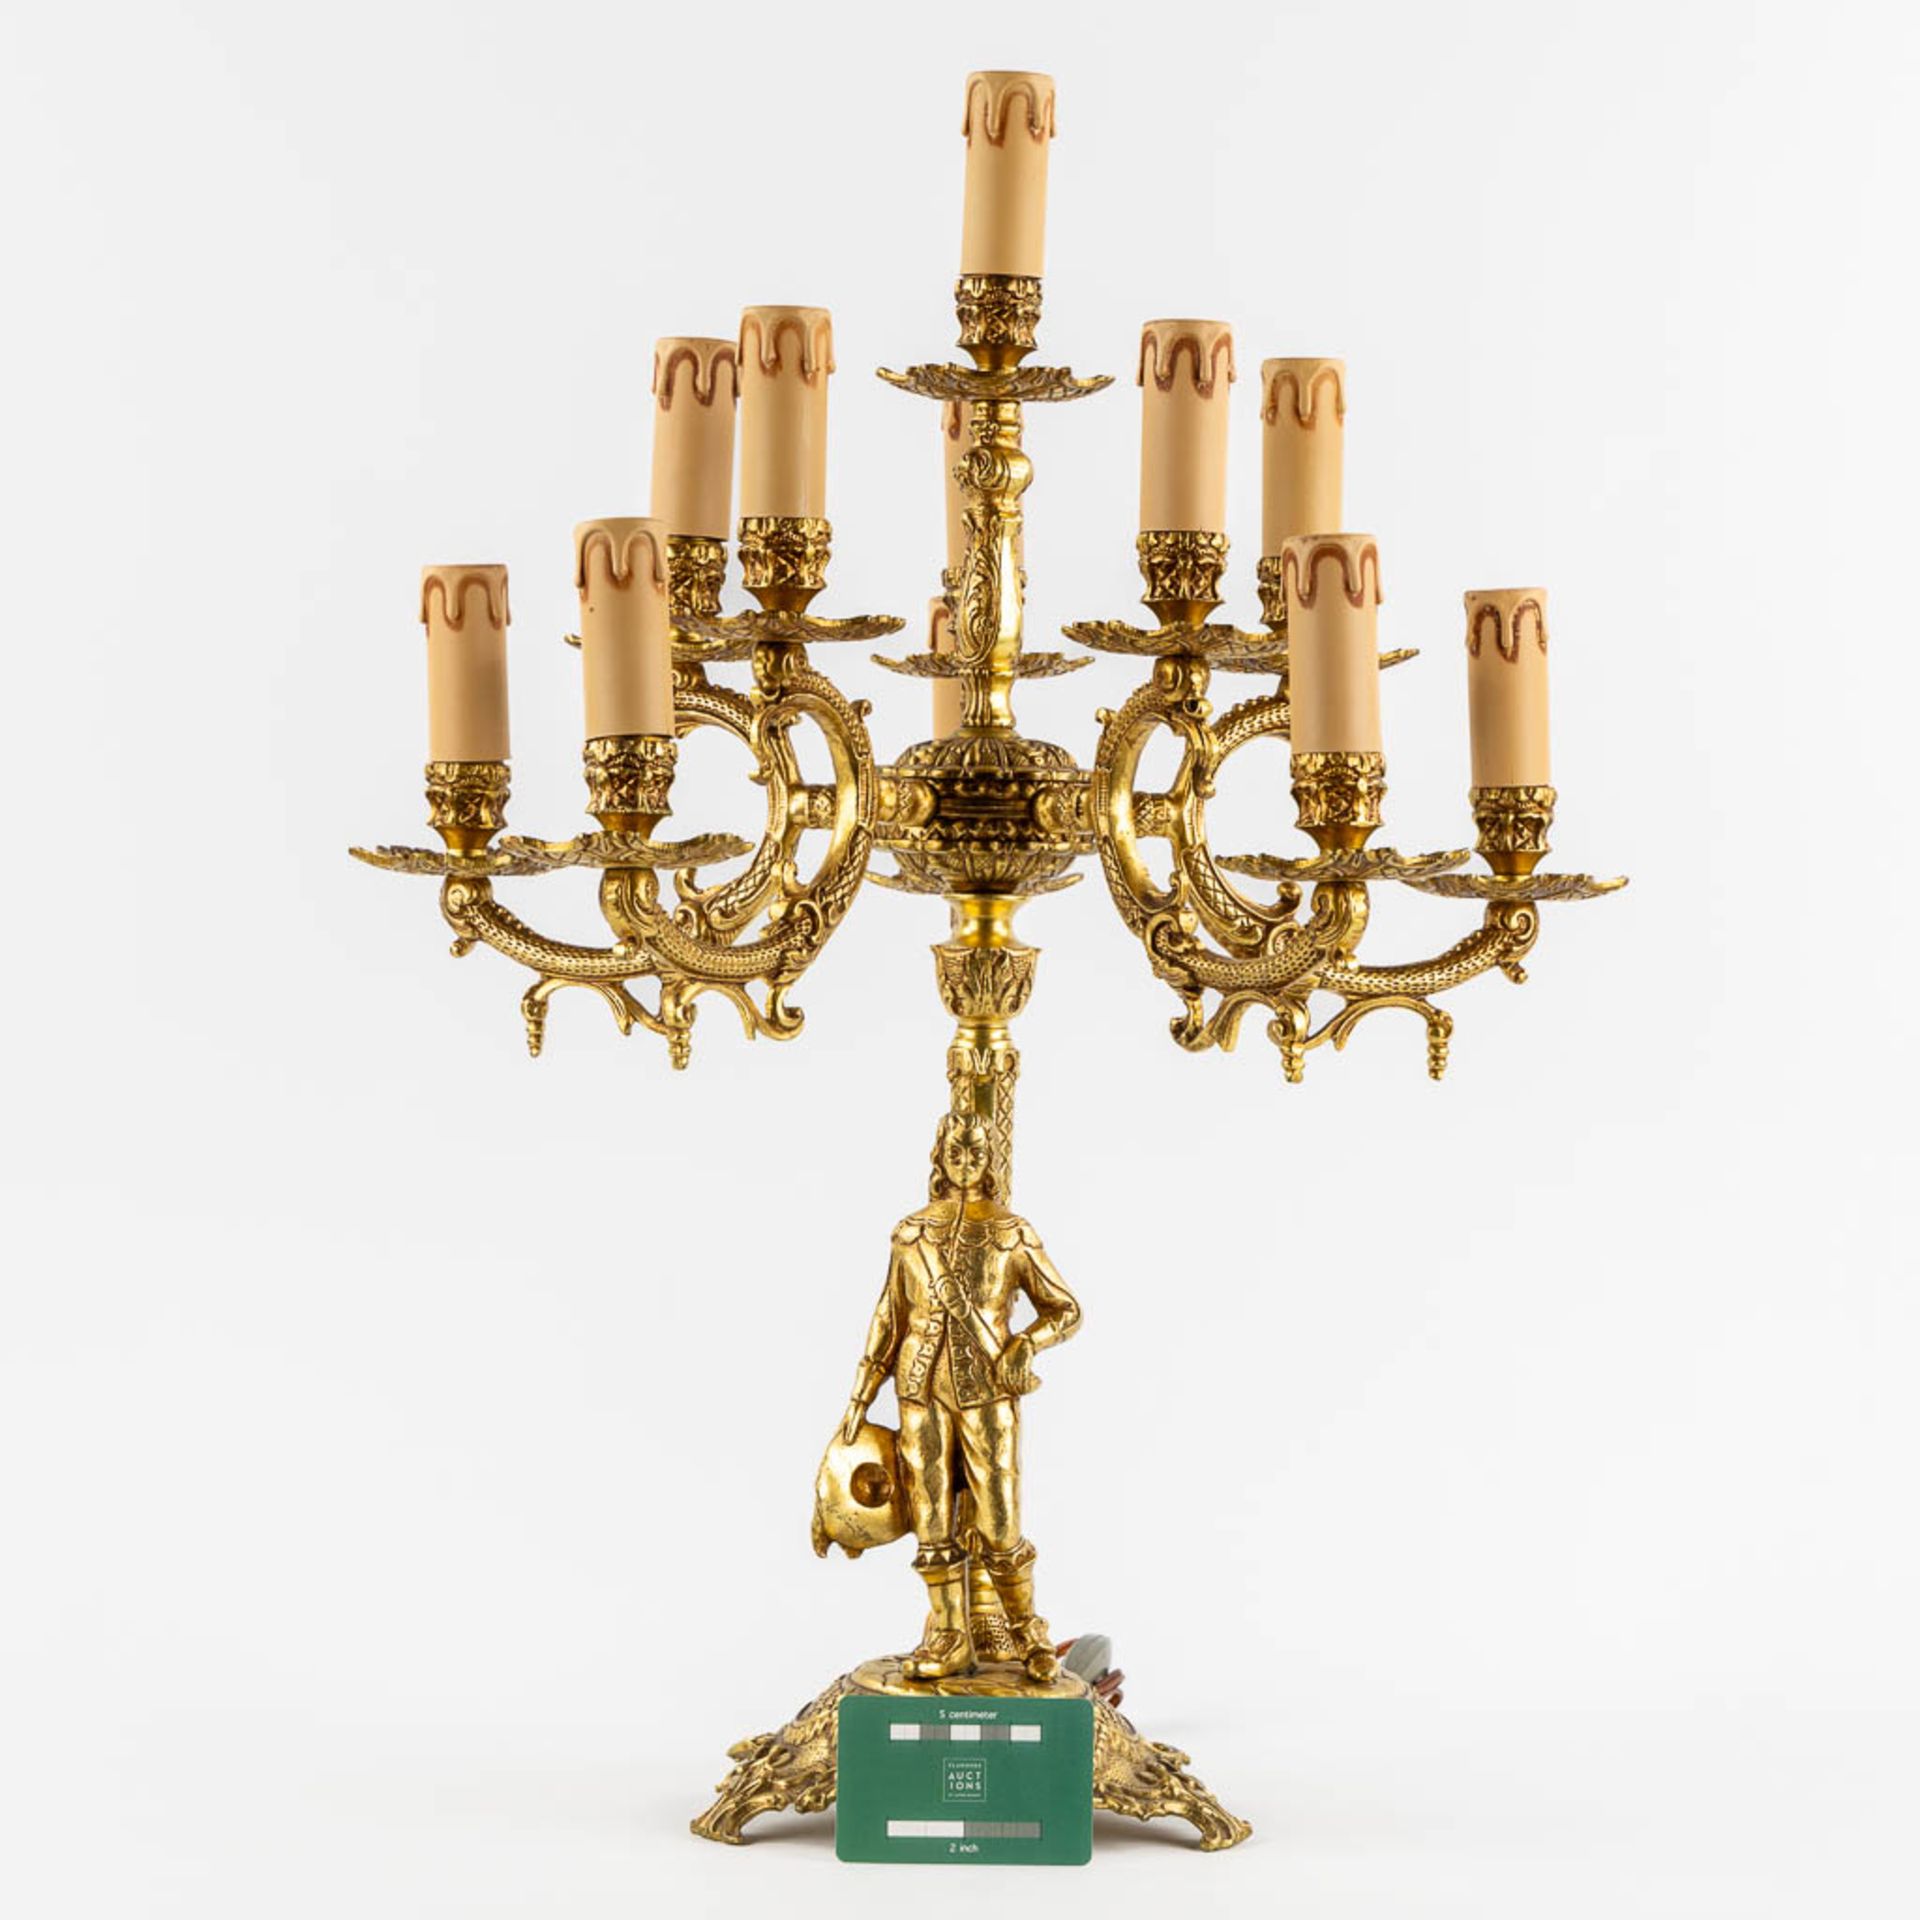 A large and decorative table lamp with a musketeer figurine, gilt bronze. 20th C. (H:61 x D:46 cm) - Bild 2 aus 11